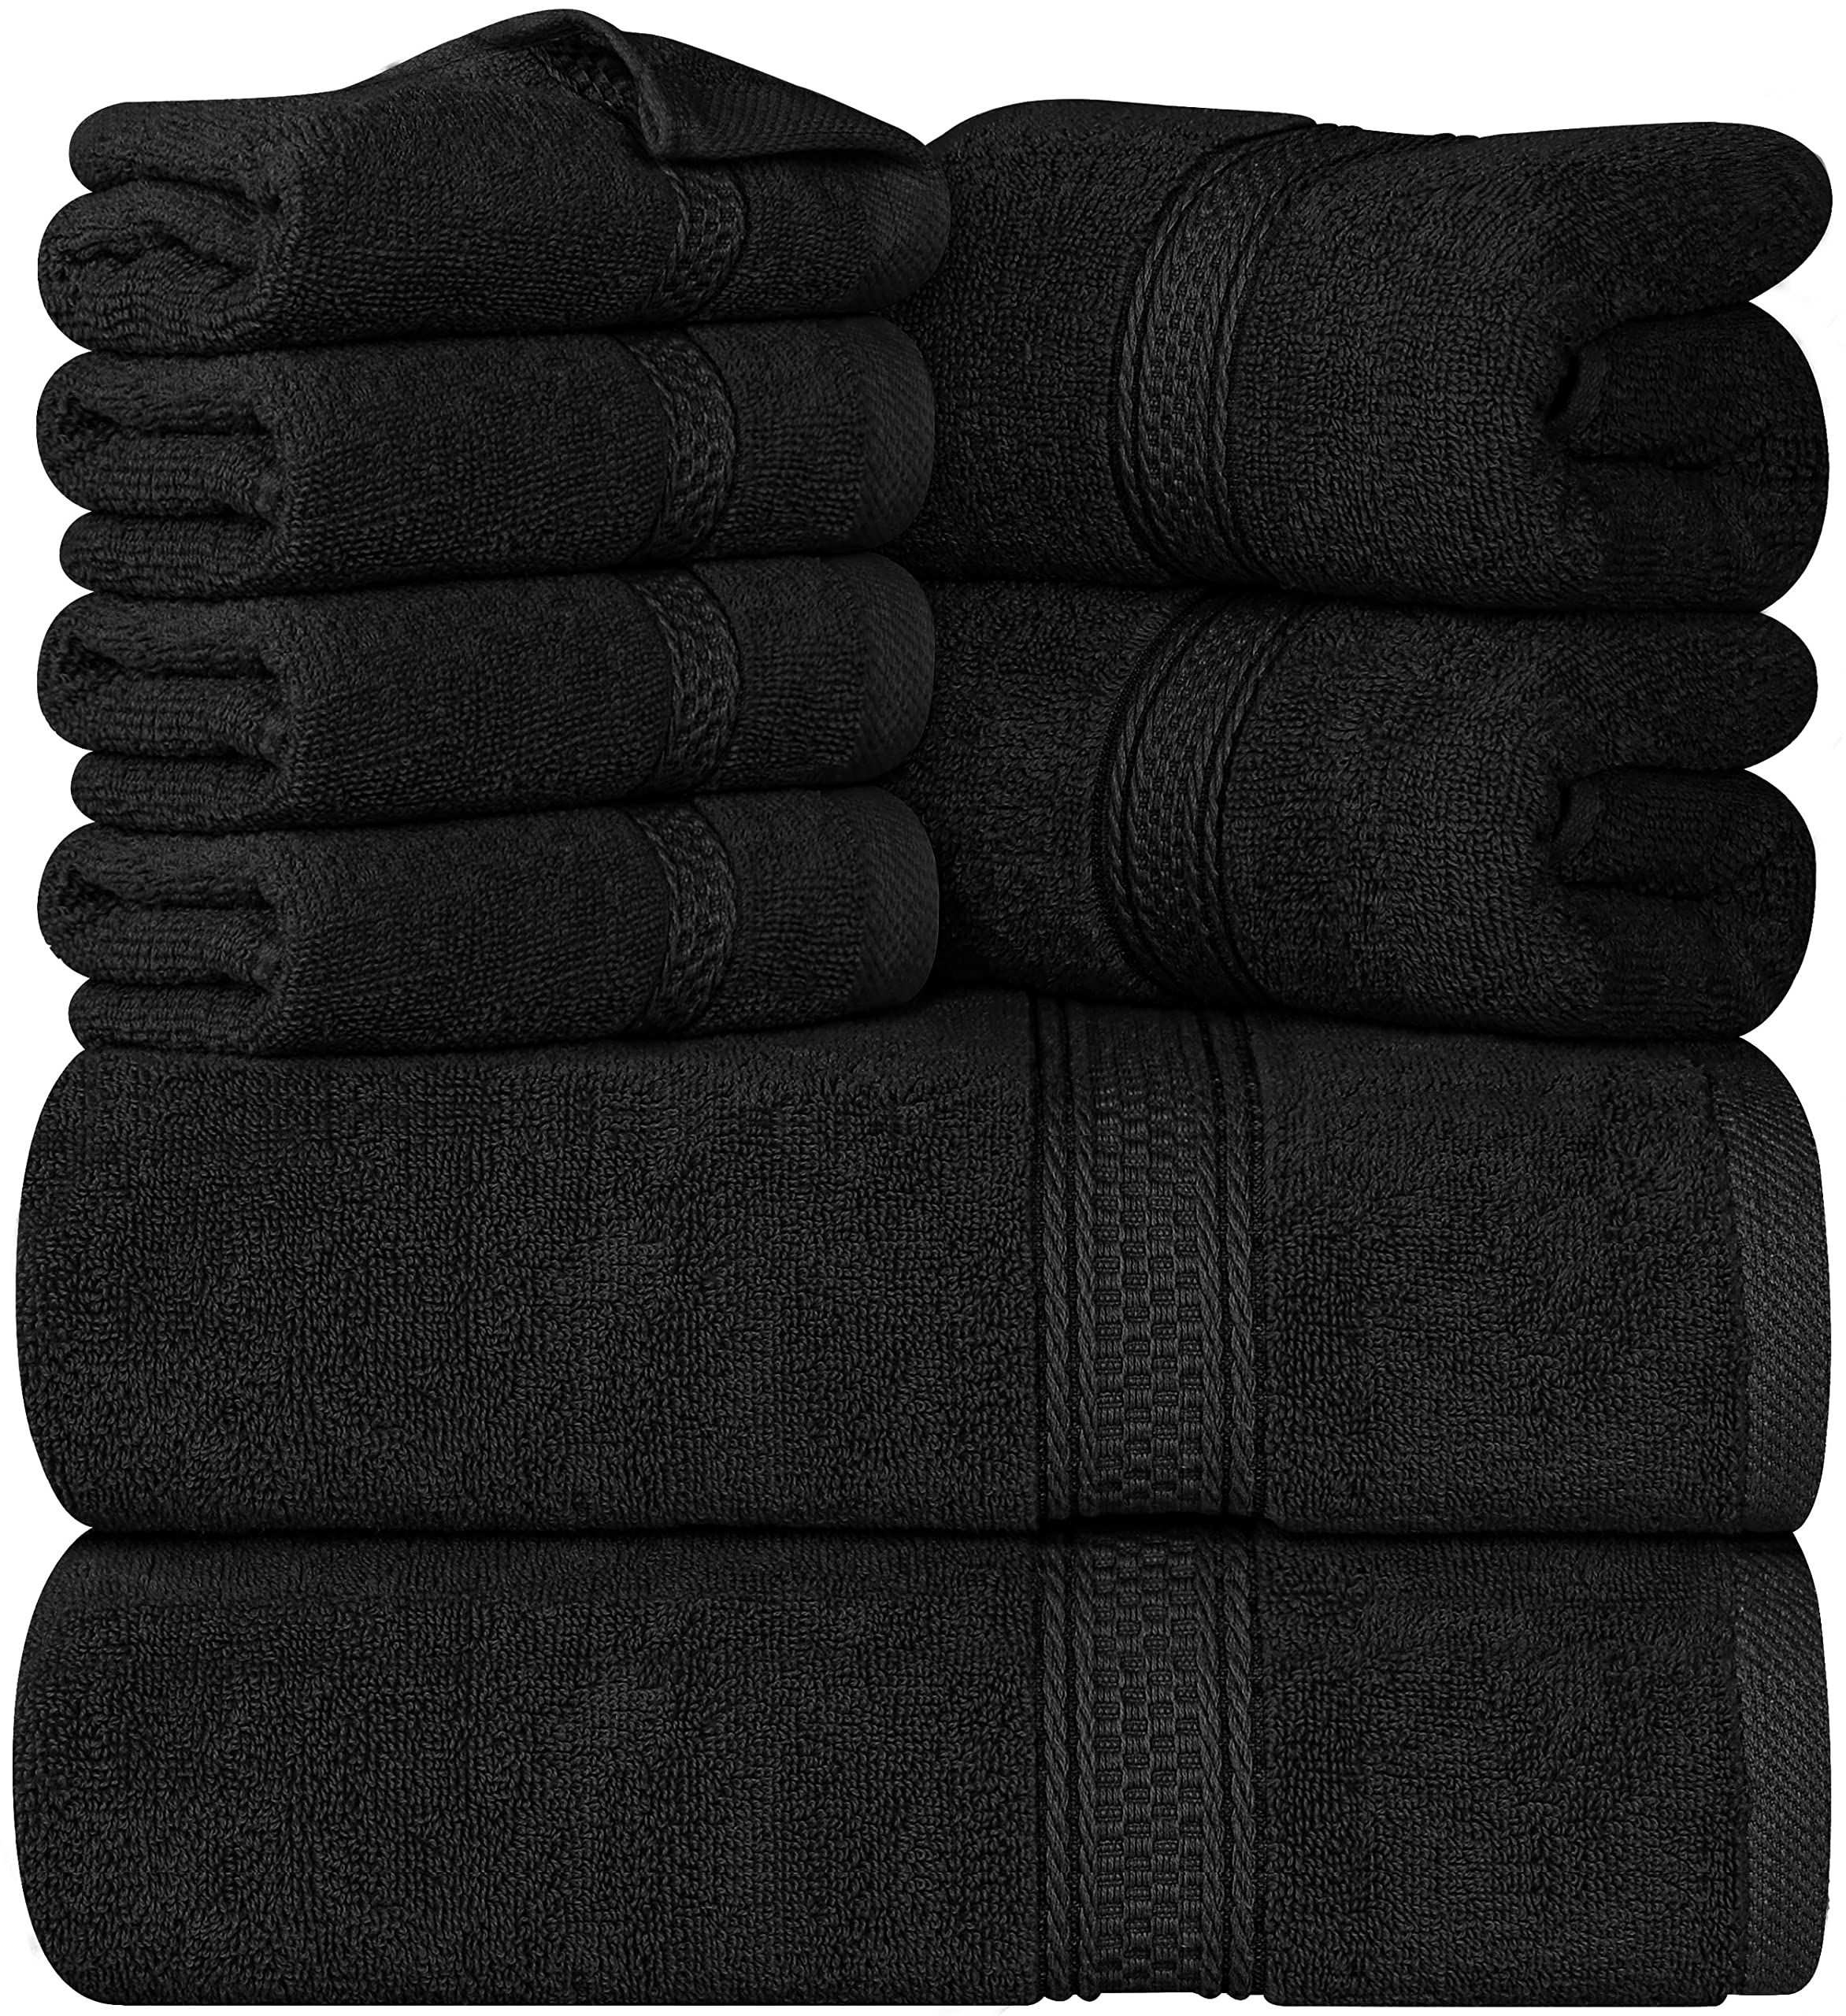 Utopia Towels 8-Piece Premium Towel Set, 2 Bath Towels, 2 Hand Towels, and 4 Wash cloths, 600 gSM 100% Ring Spun cotton Highly A